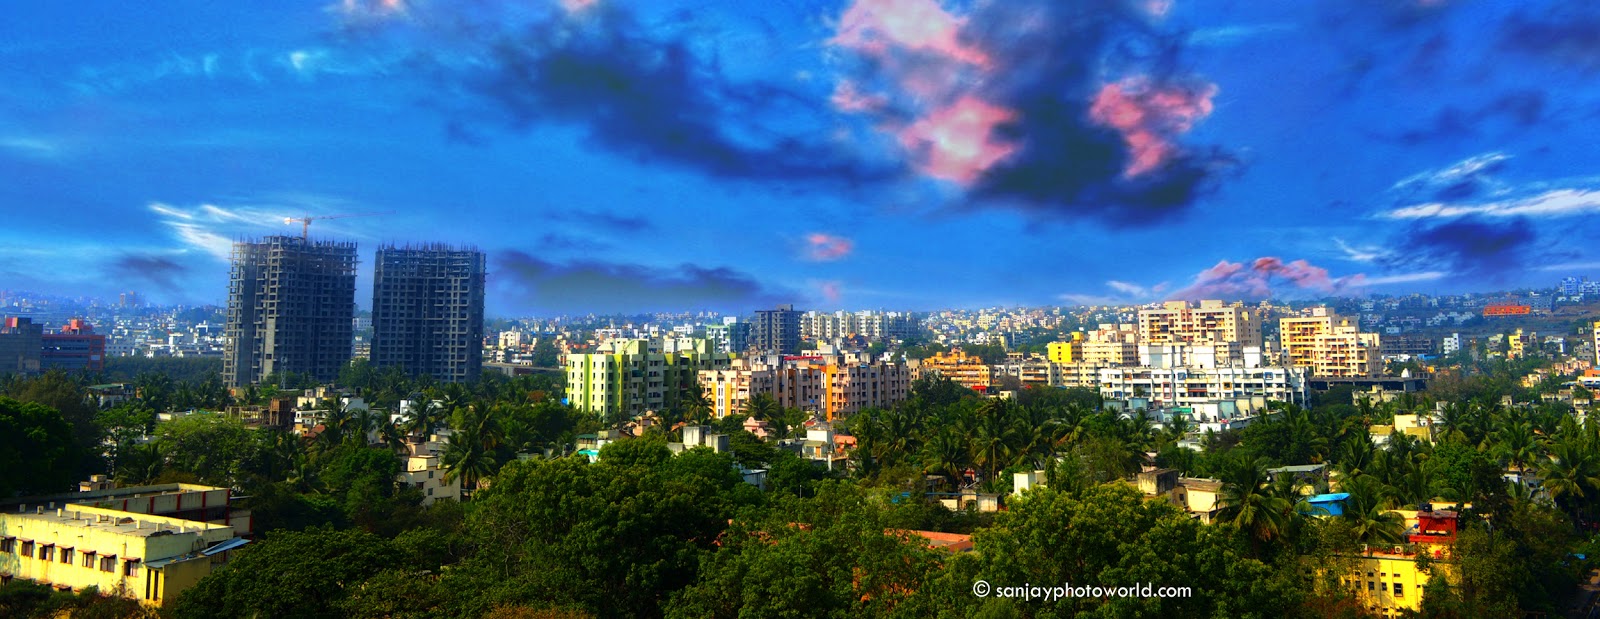 Pune city in India HD Photography wallpaper